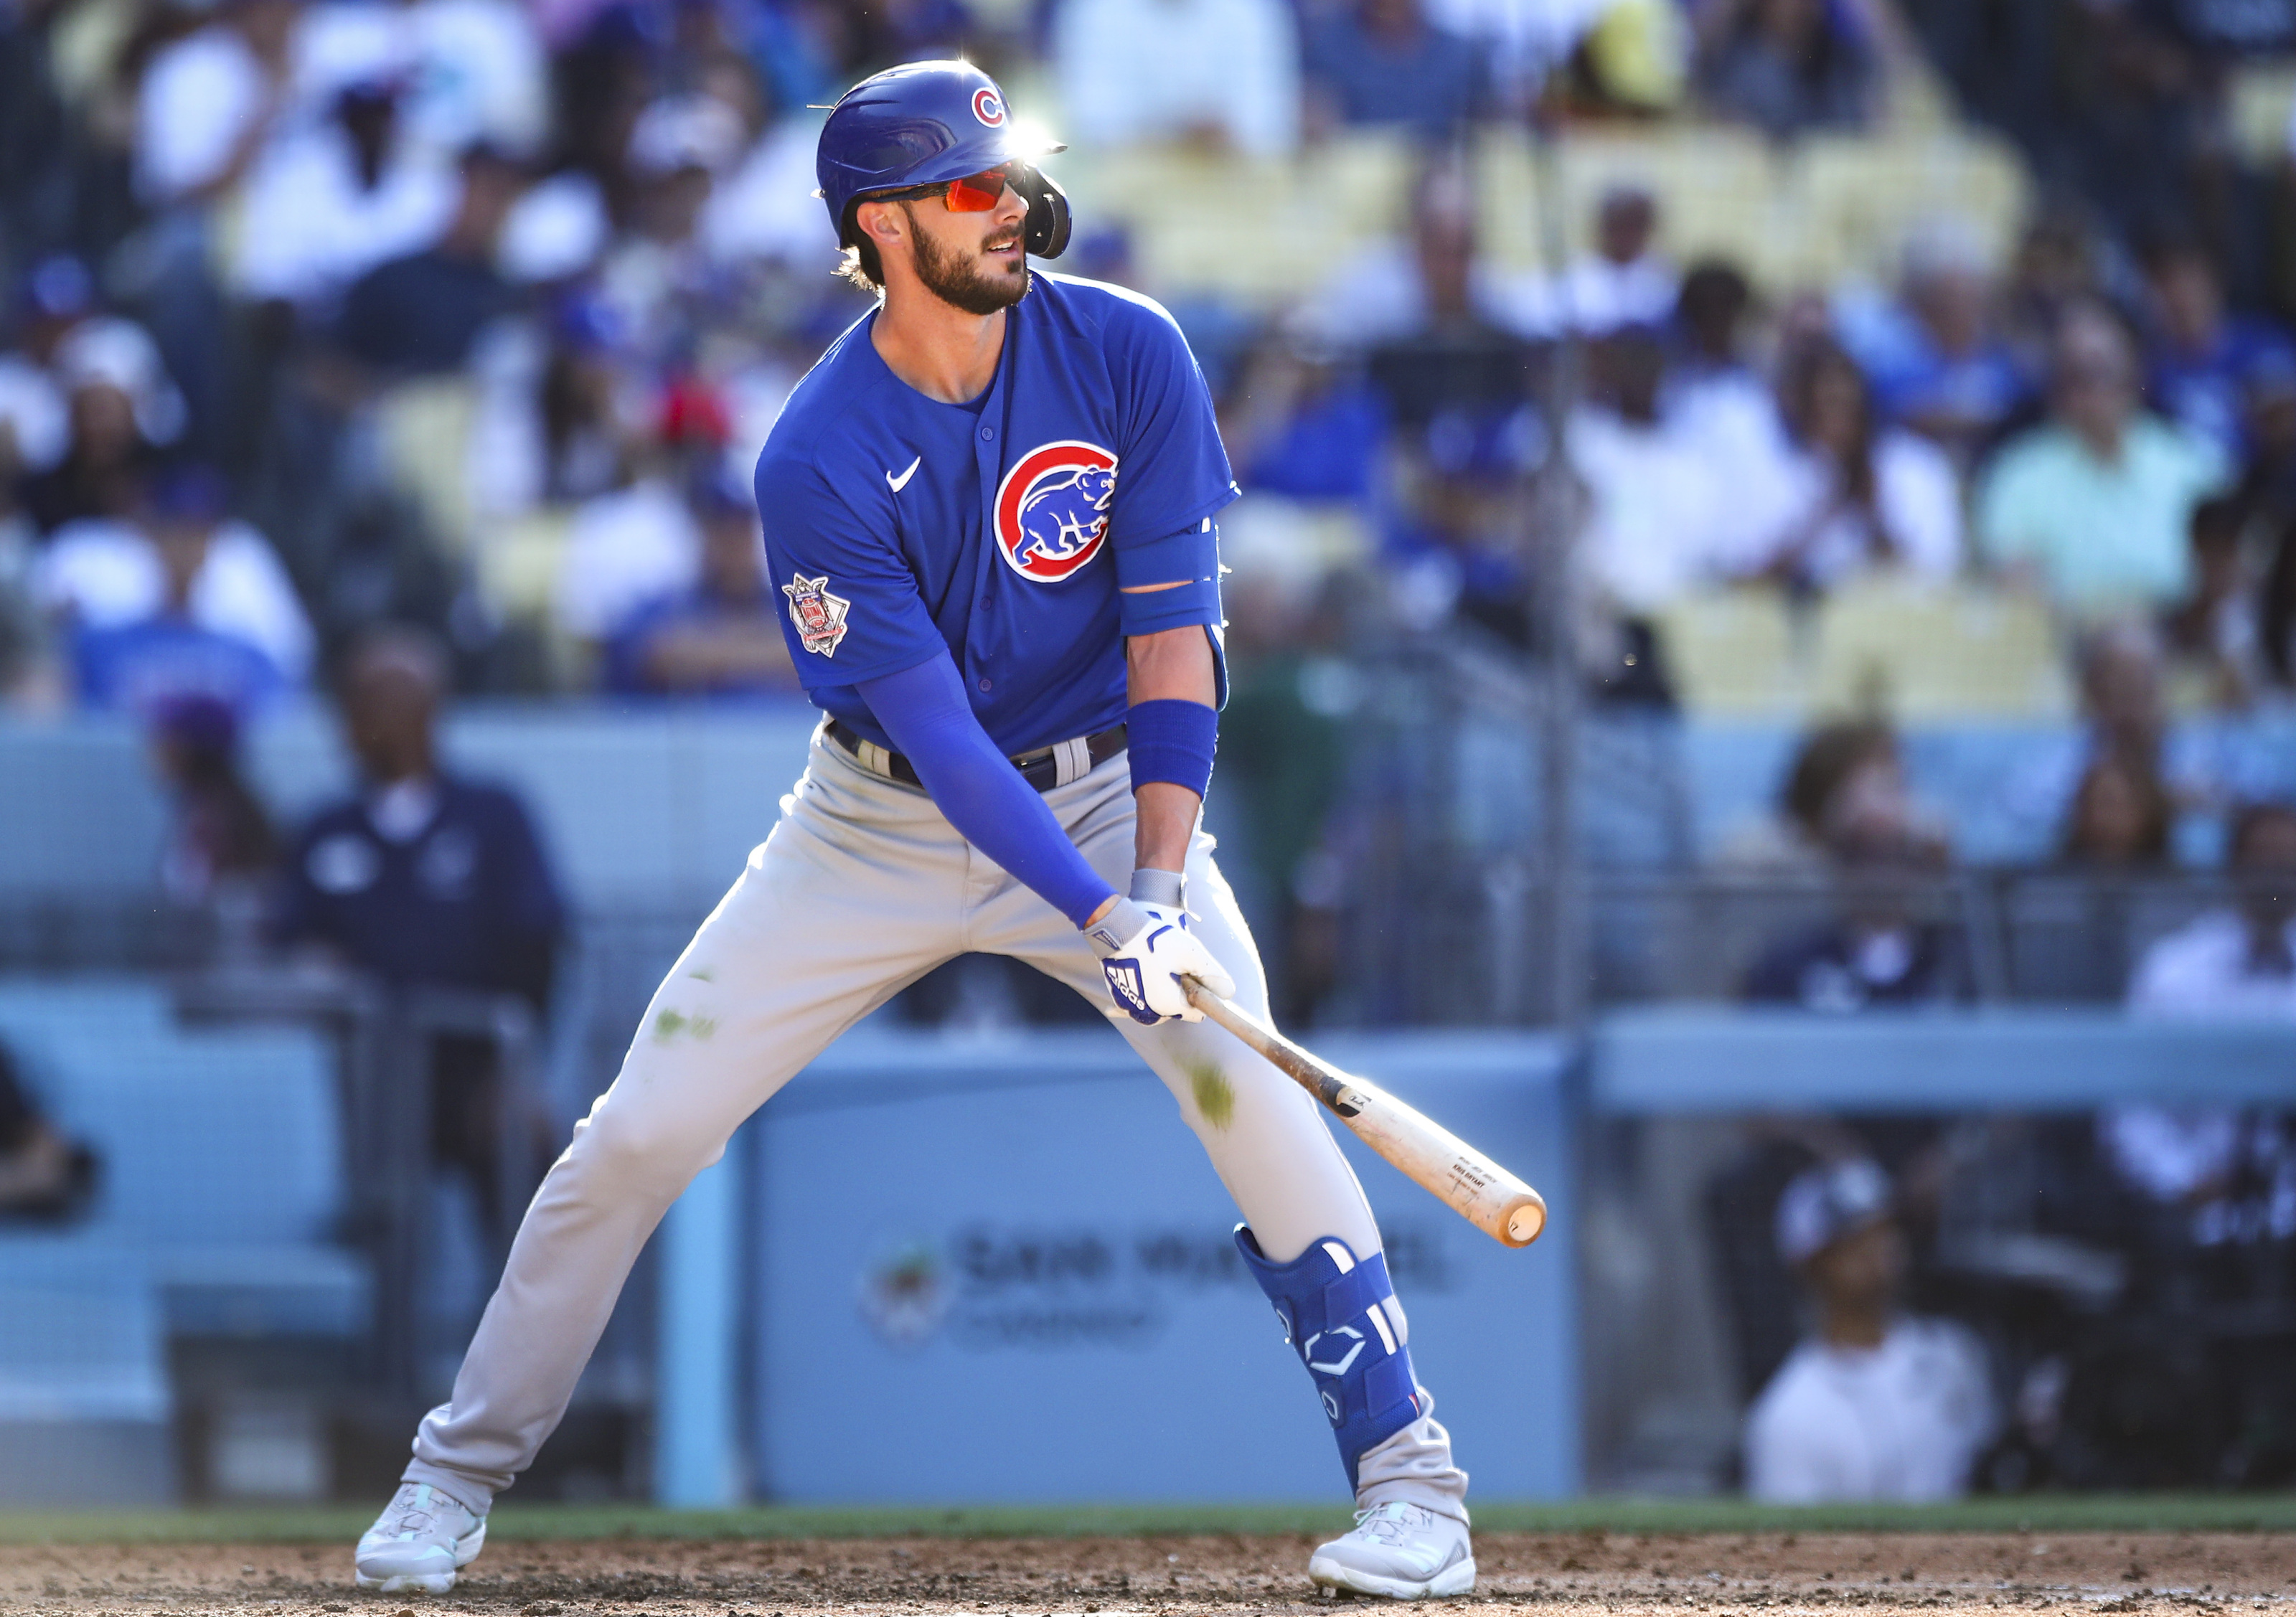 Chicago Cubs star Kris Bryant homers in rehab start with Tennessee